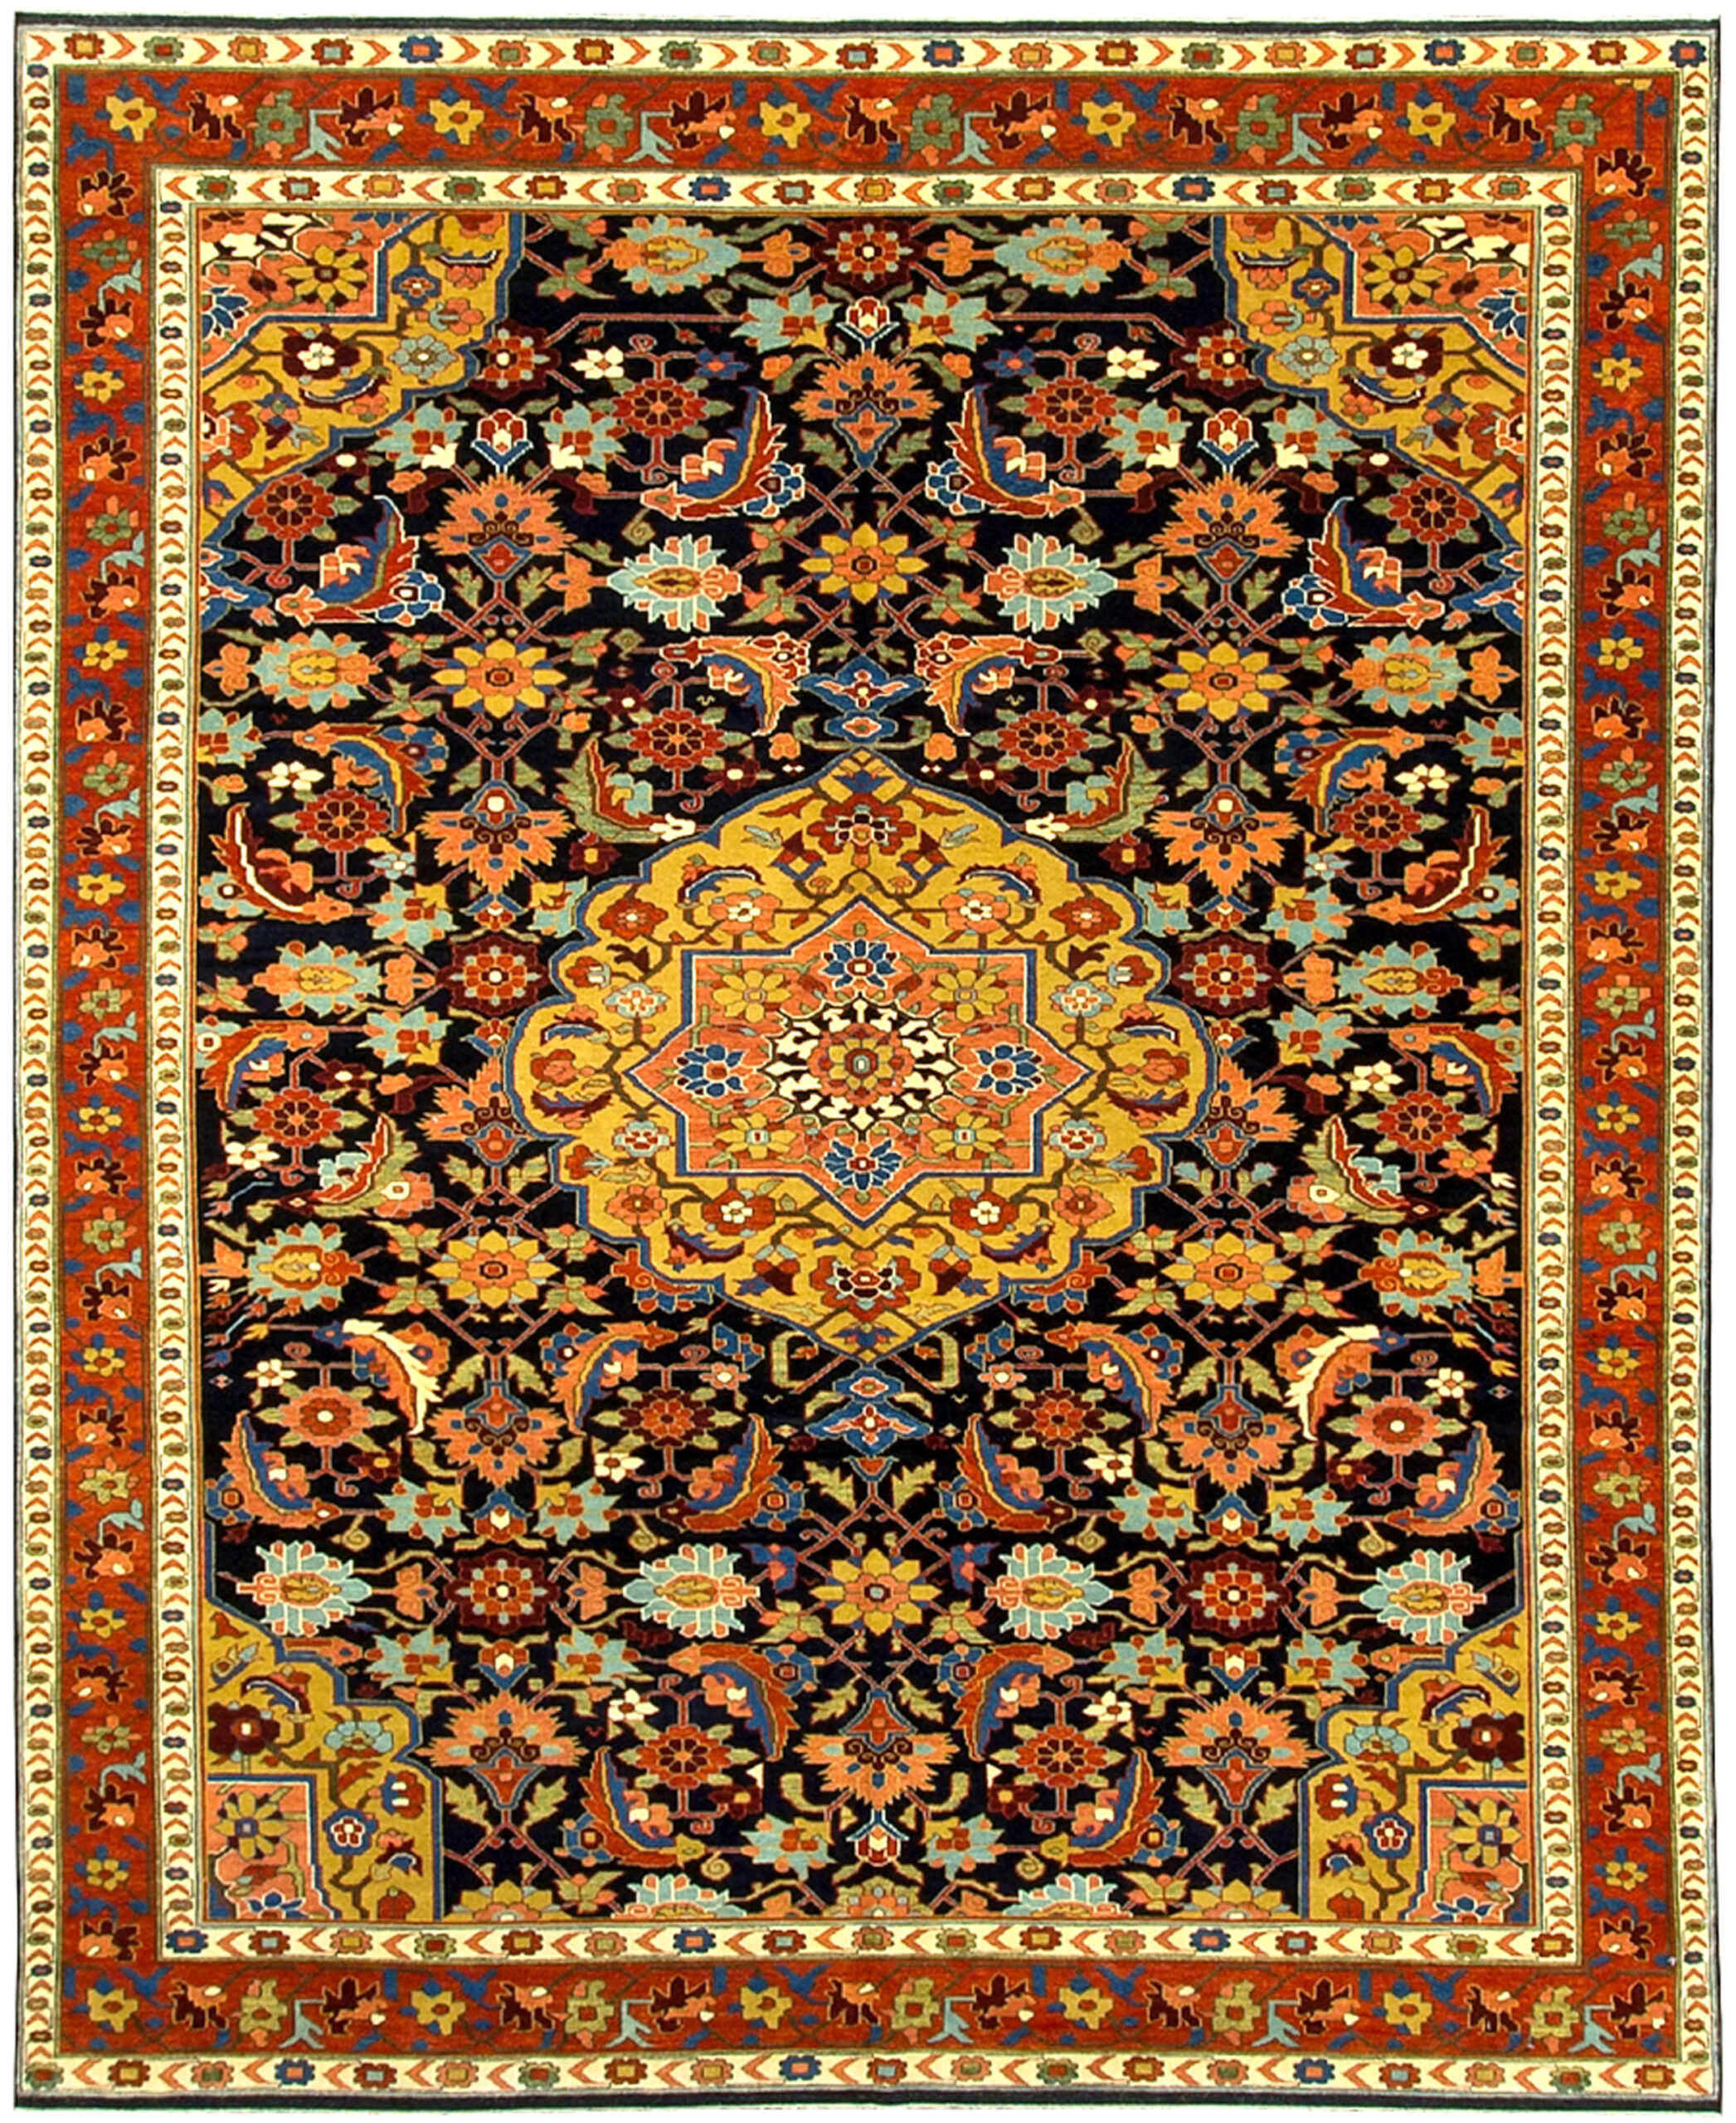 Contemporary hand woven Turkish carpet with a Persian Herati design featuring a yellow medallion on a navy blue field - Douglas Stock Gallery, Oriental rugs Boston,MA area